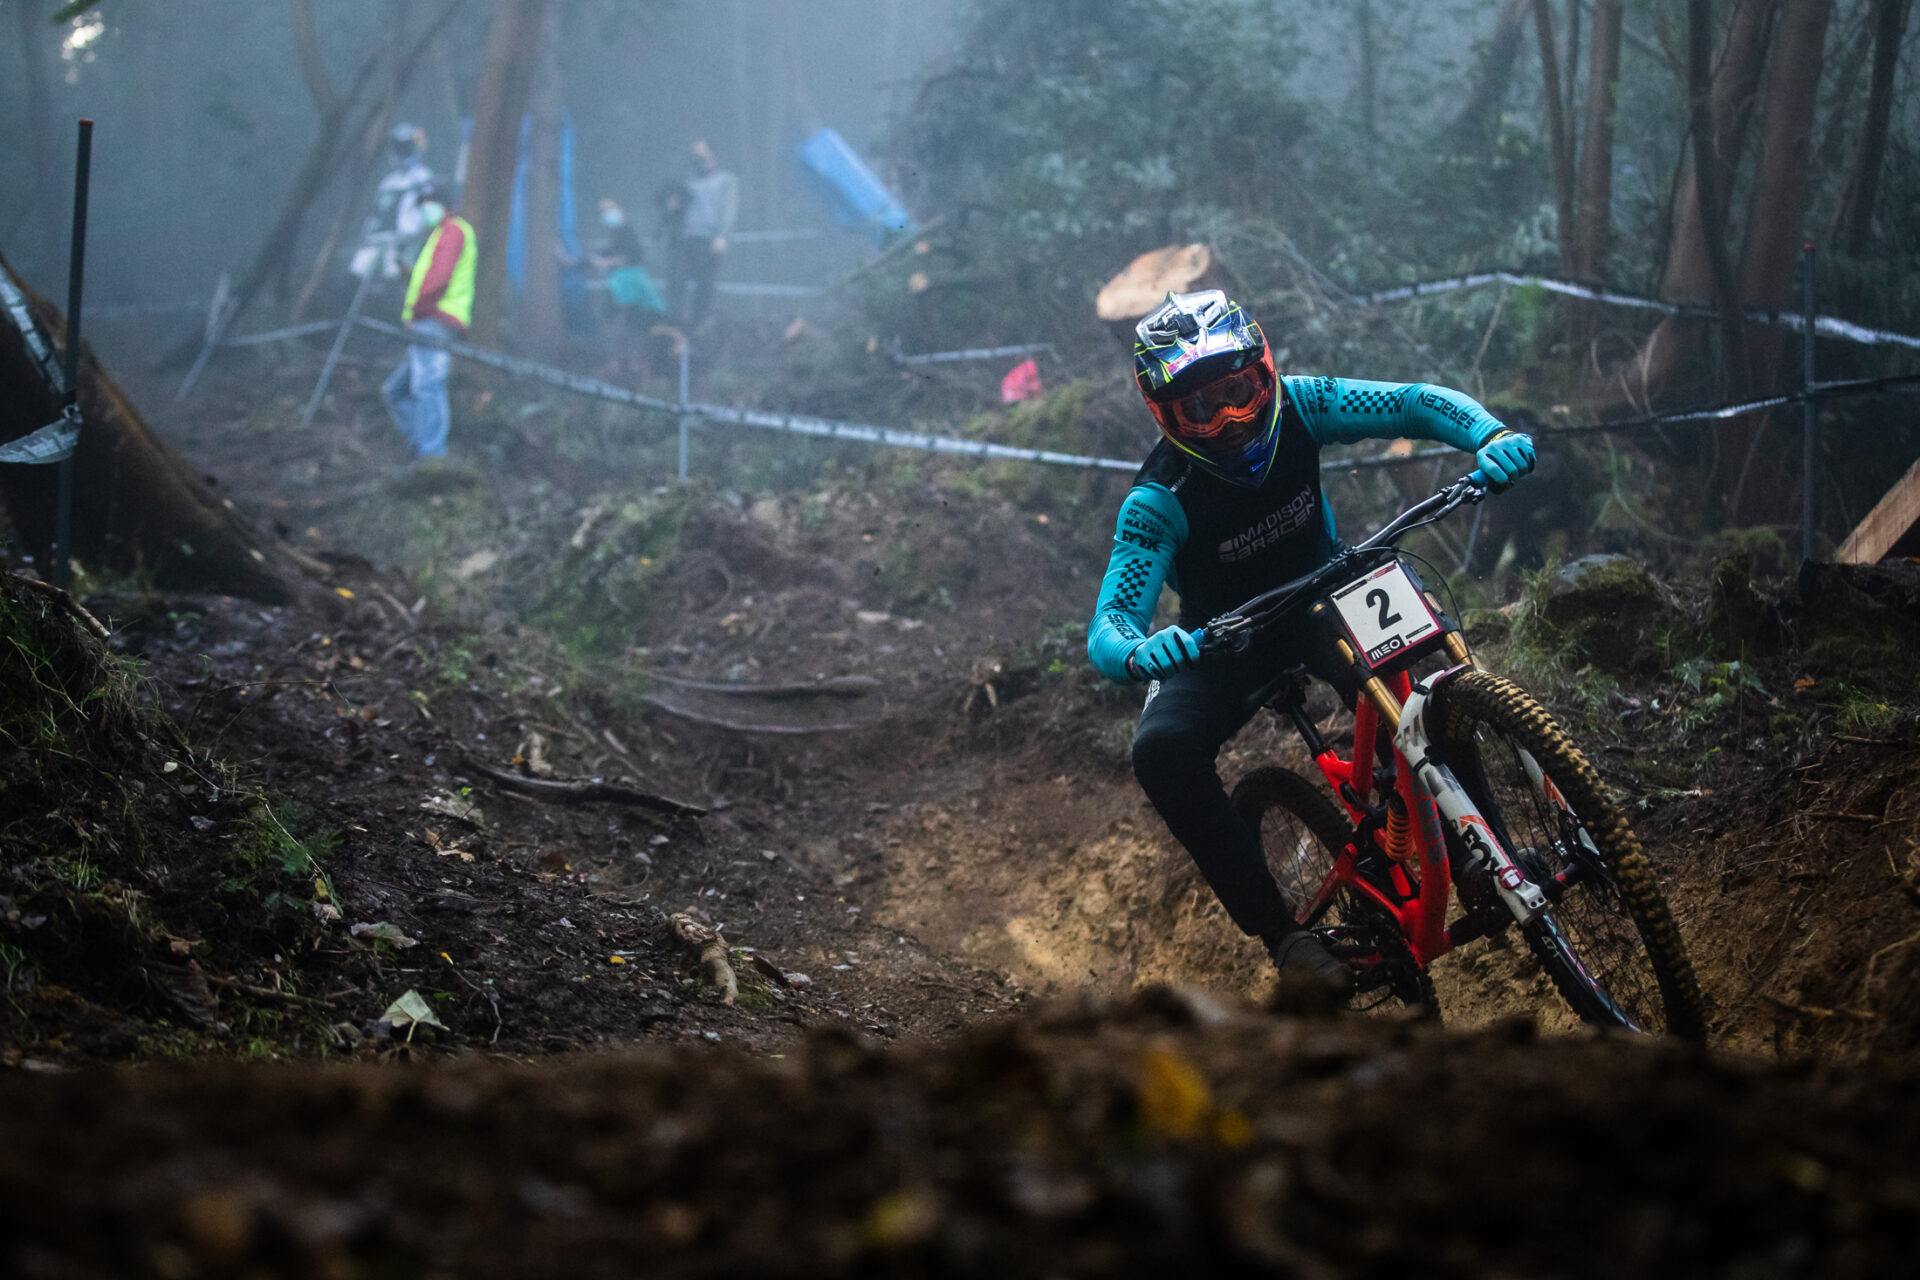 madison saracen team member riding in the damp weather